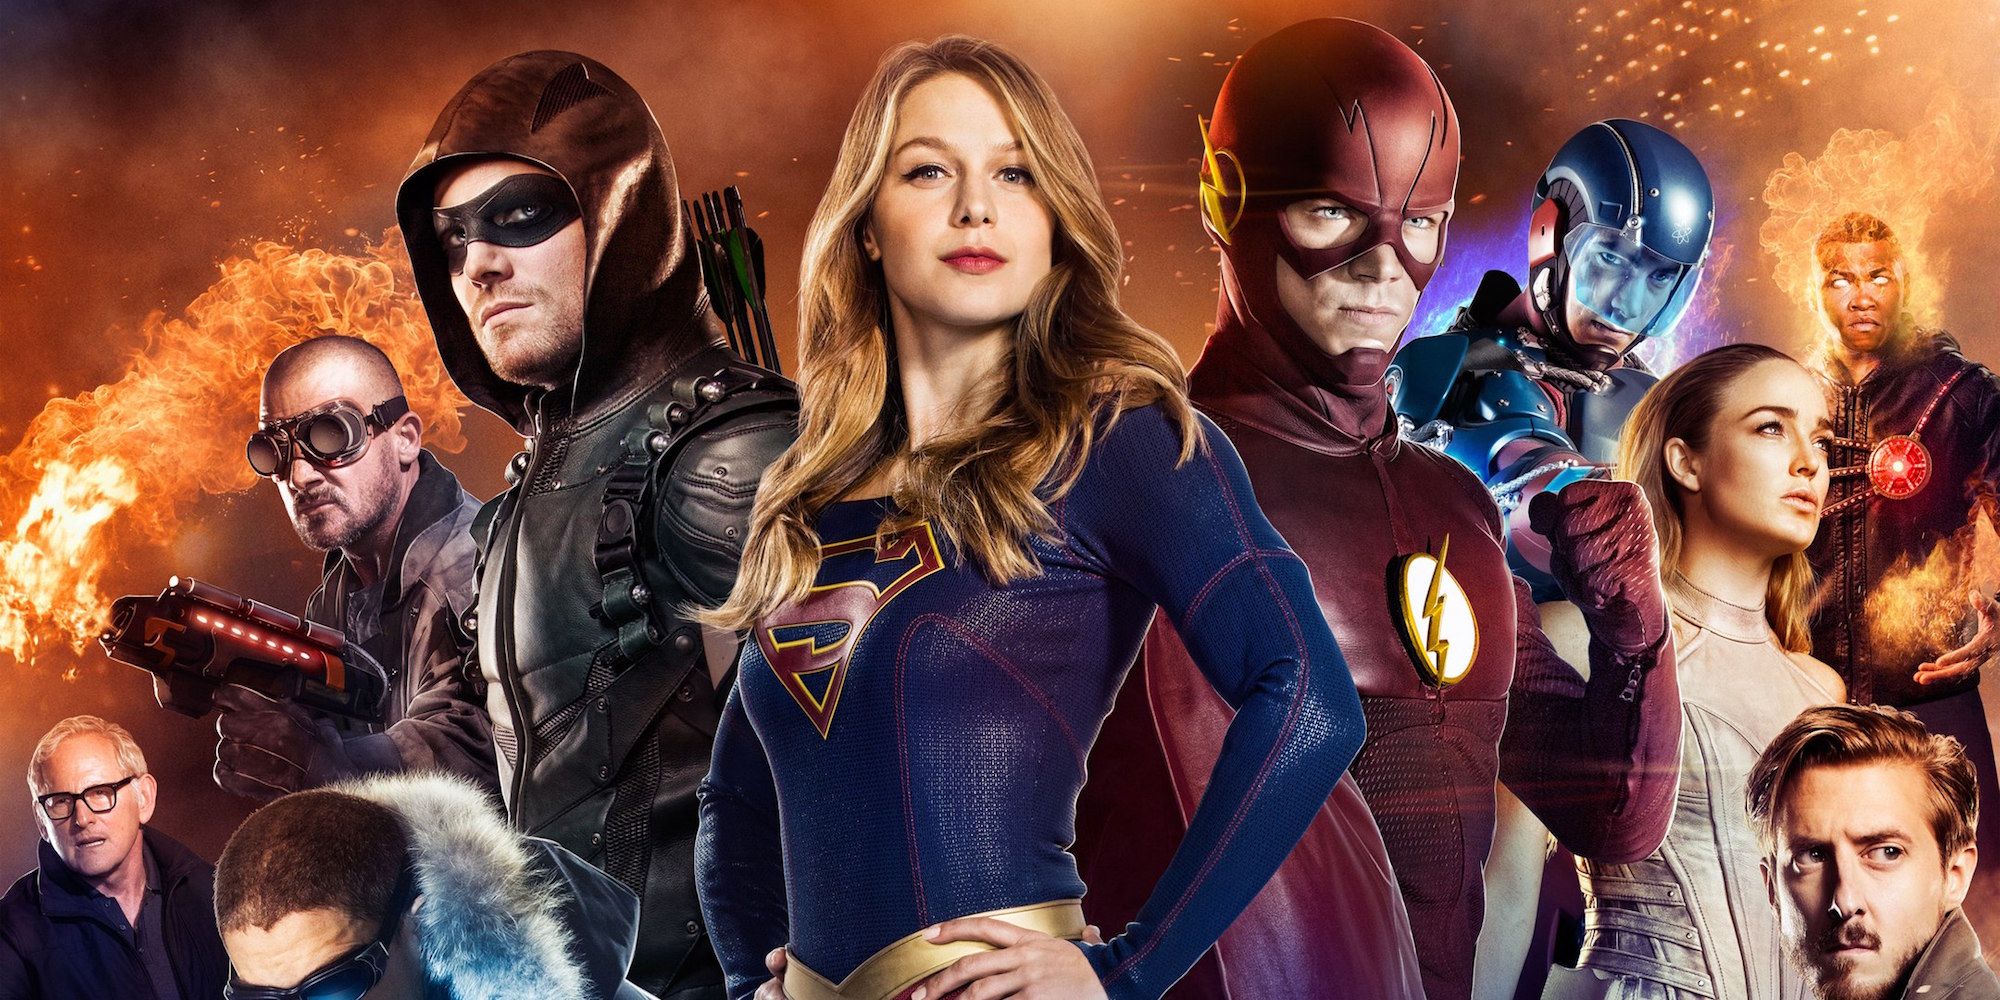 cw-legends-of-tomorrow-arrow-the-flash-supergirl-banner